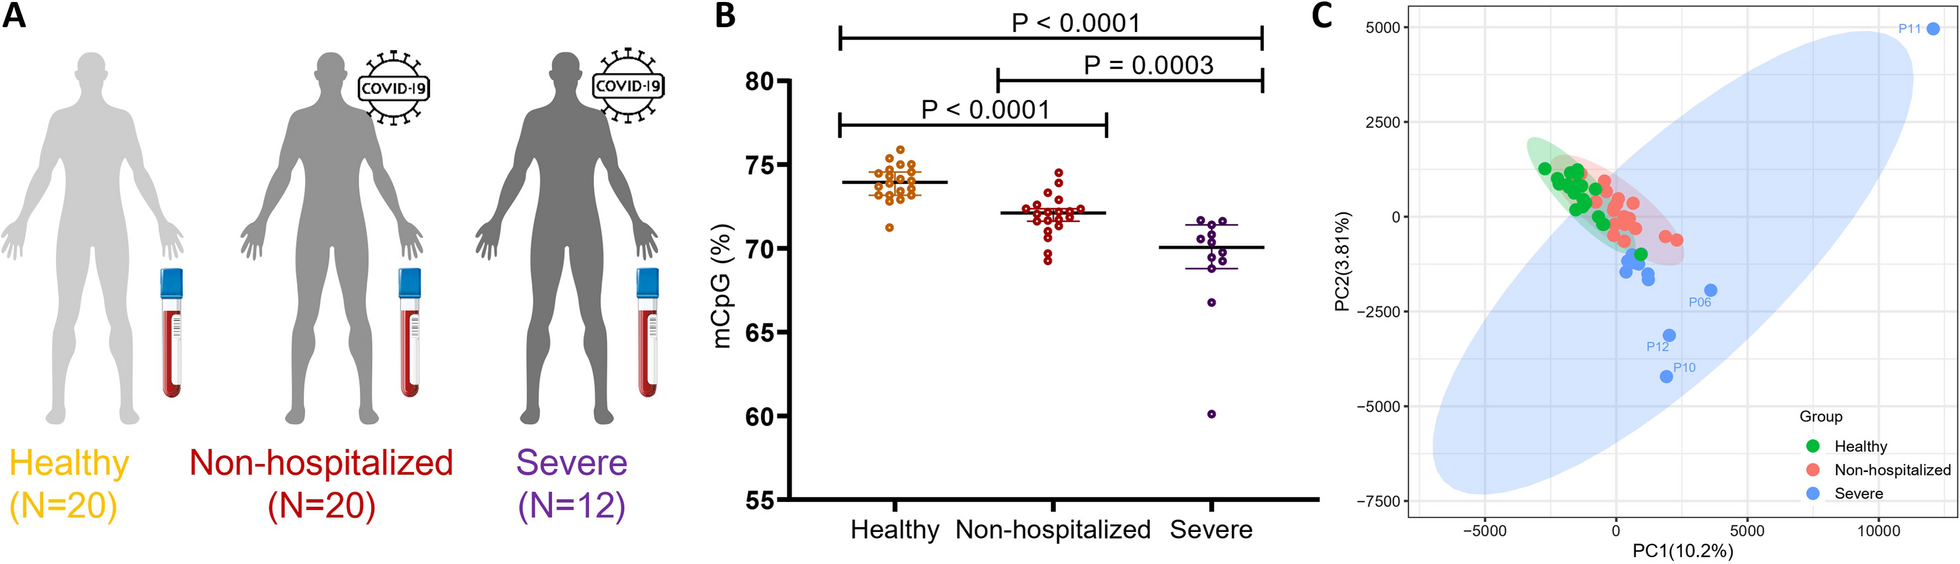 Cell-free DNA methylation reveals cell-specific tissue injury and correlates with disease severity and patient outcomes in COVID-19